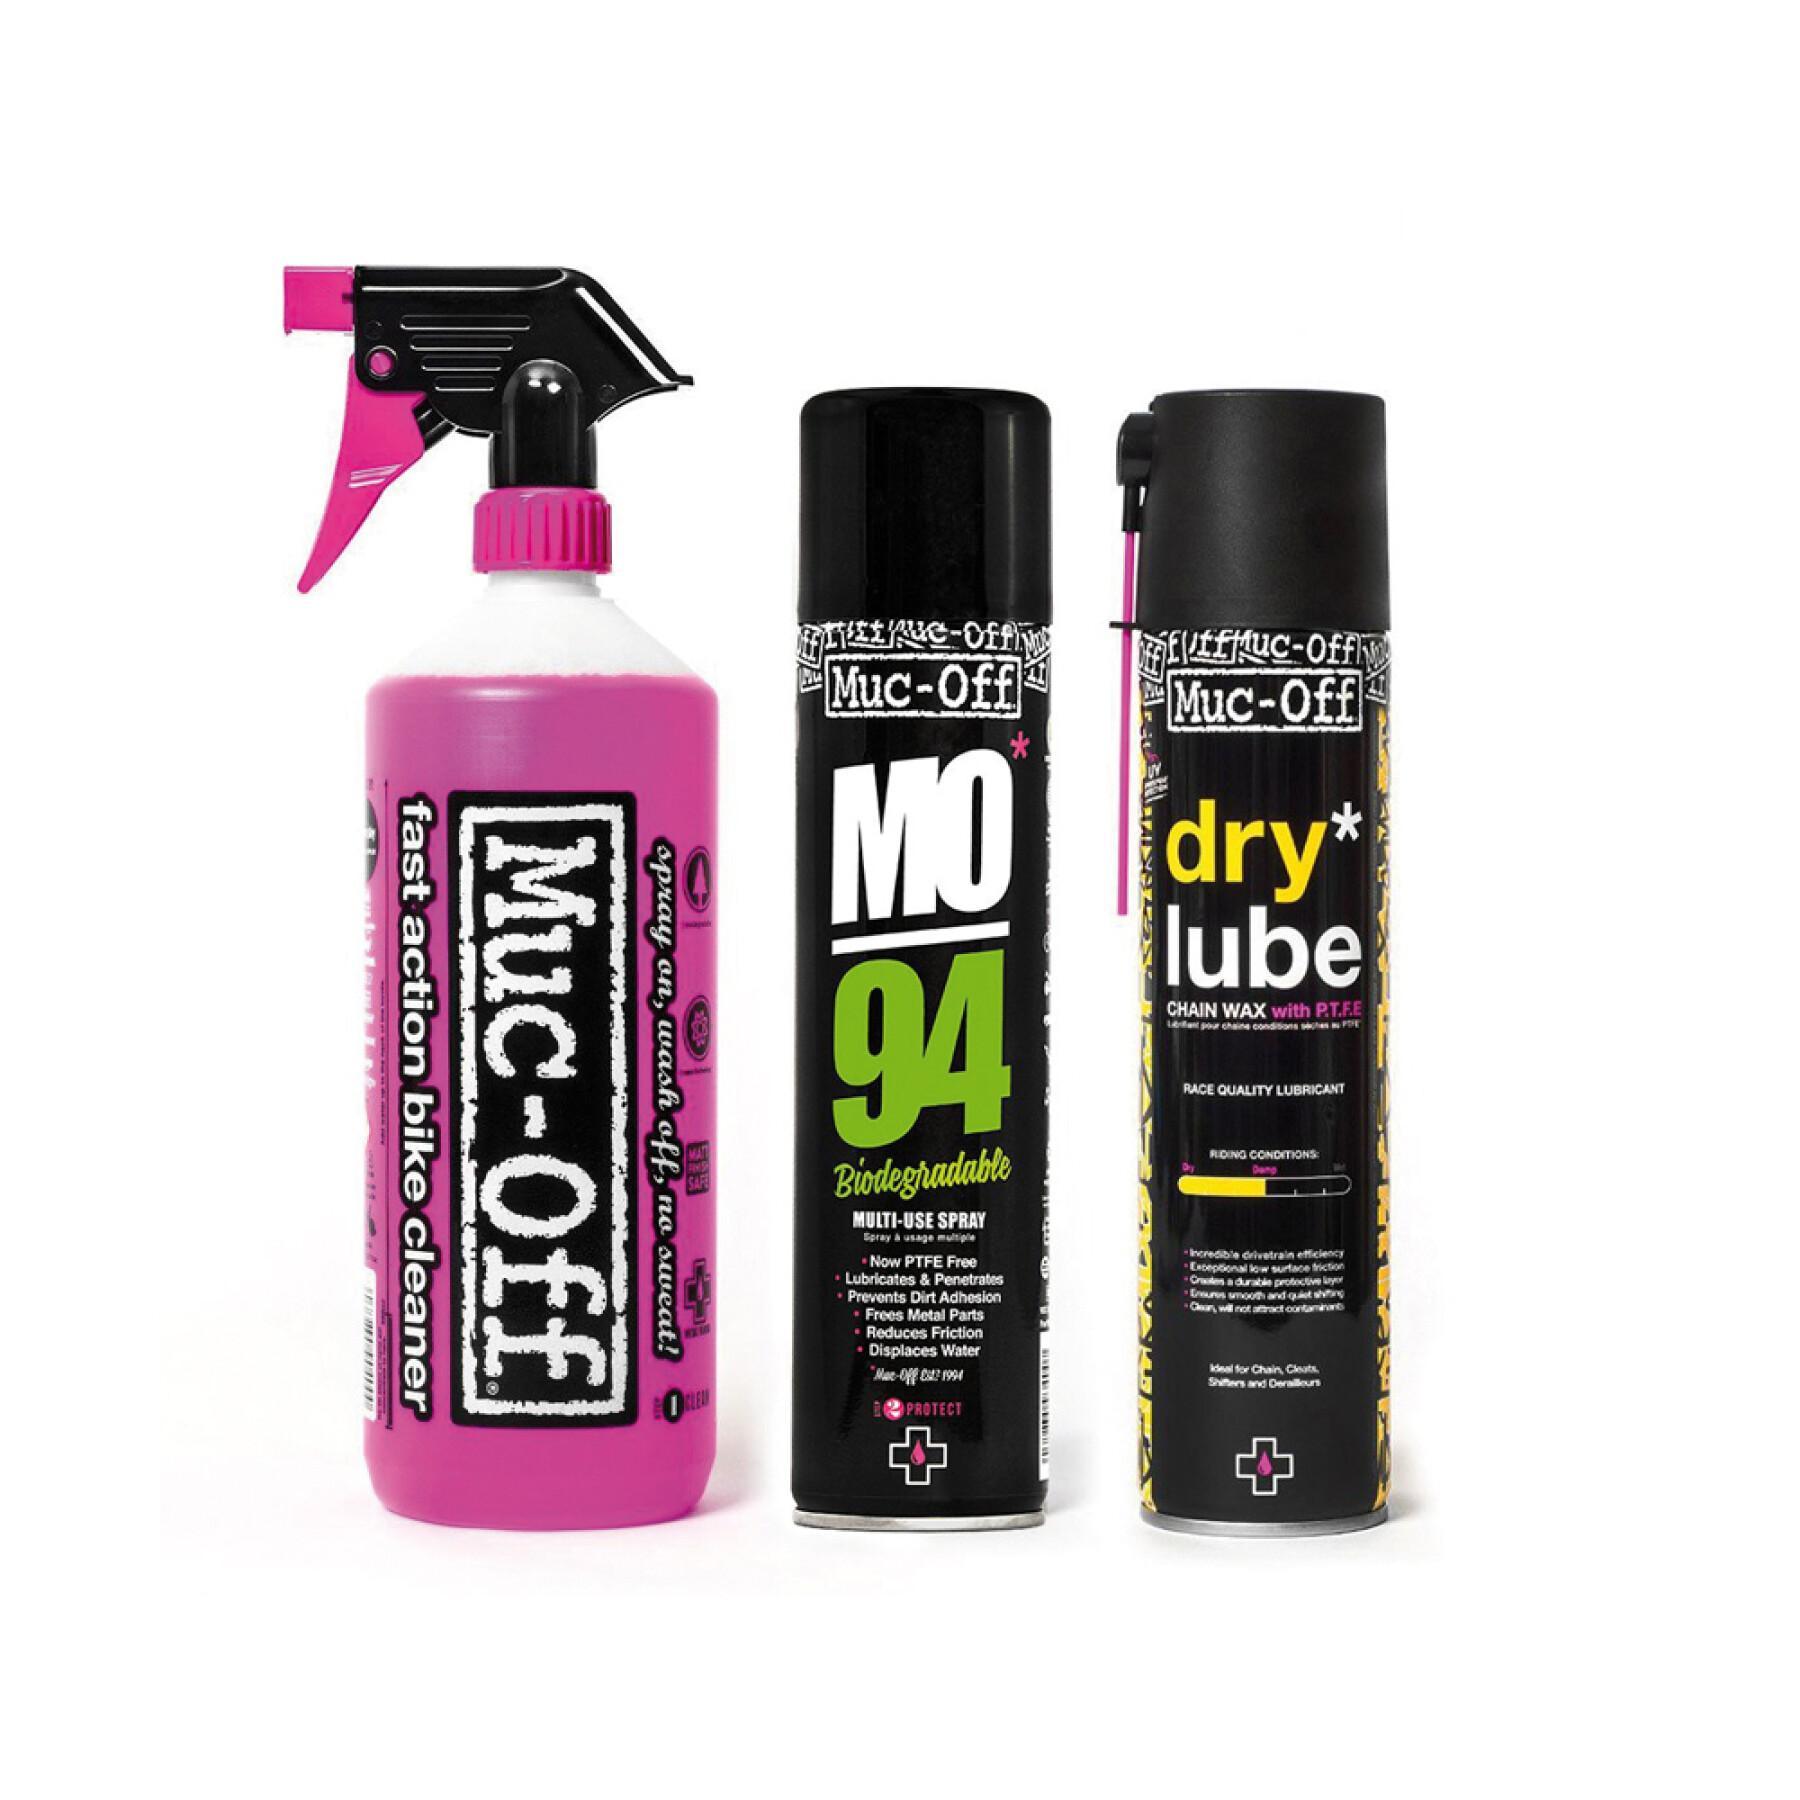 Reiniger Muc-Off wash protect and lube kit dry